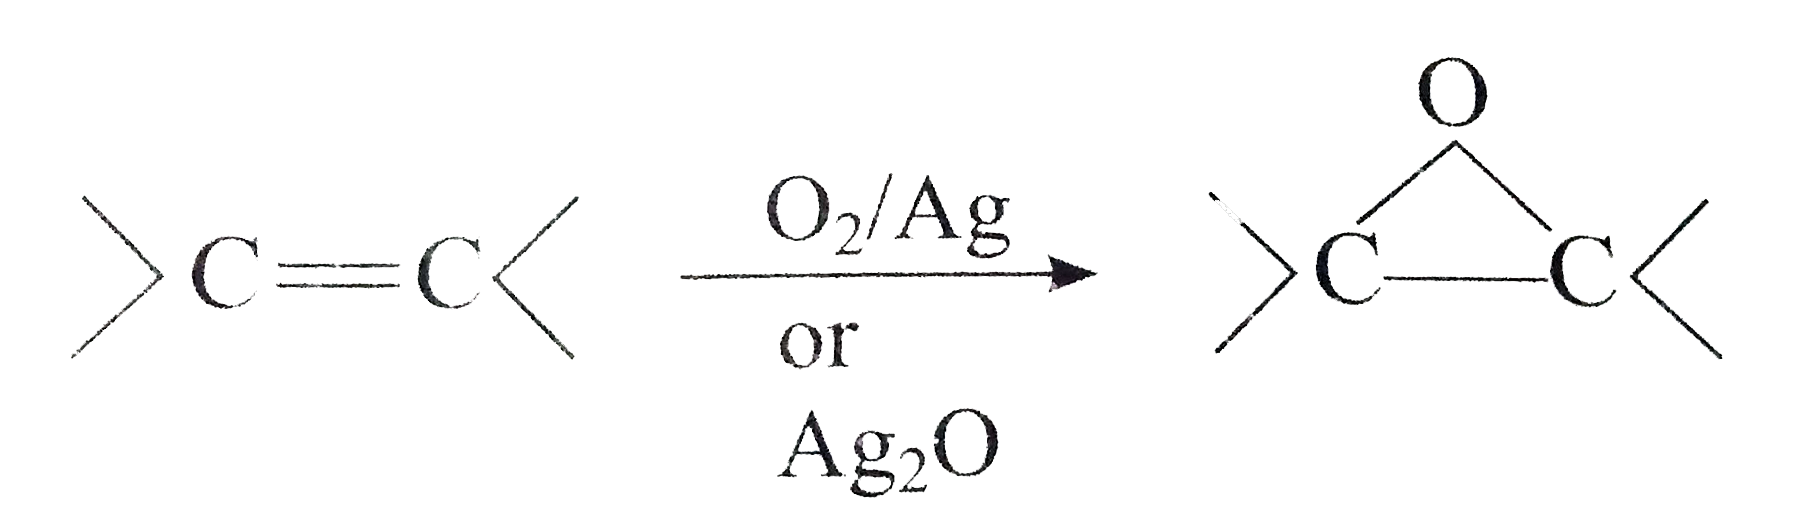 Oxidation without clevage of sigma bond takes place in alkenes.      Presence of unsaturation in alkenes is detected by using Baeyer's reagent. Alkenes decolourise pink colour of Baeyer's reagent. In presence of Baeyer's reagent, 'syn' addition of -OH groups takes place on both carbons of double bond. The net reaction can be given as,   R-CH=CH-R overset(KMnO(4))underset(OH^(-))to R-overset(OH)overset(|)(CH)-overset(OH)overset(|)(CH)-R   Ozonolysis of alkenes gives ozonide, which on further hydrolysis gives aldehyde and/ or ketone.      Which of these compounds give glyoxal only on ozonolysis?